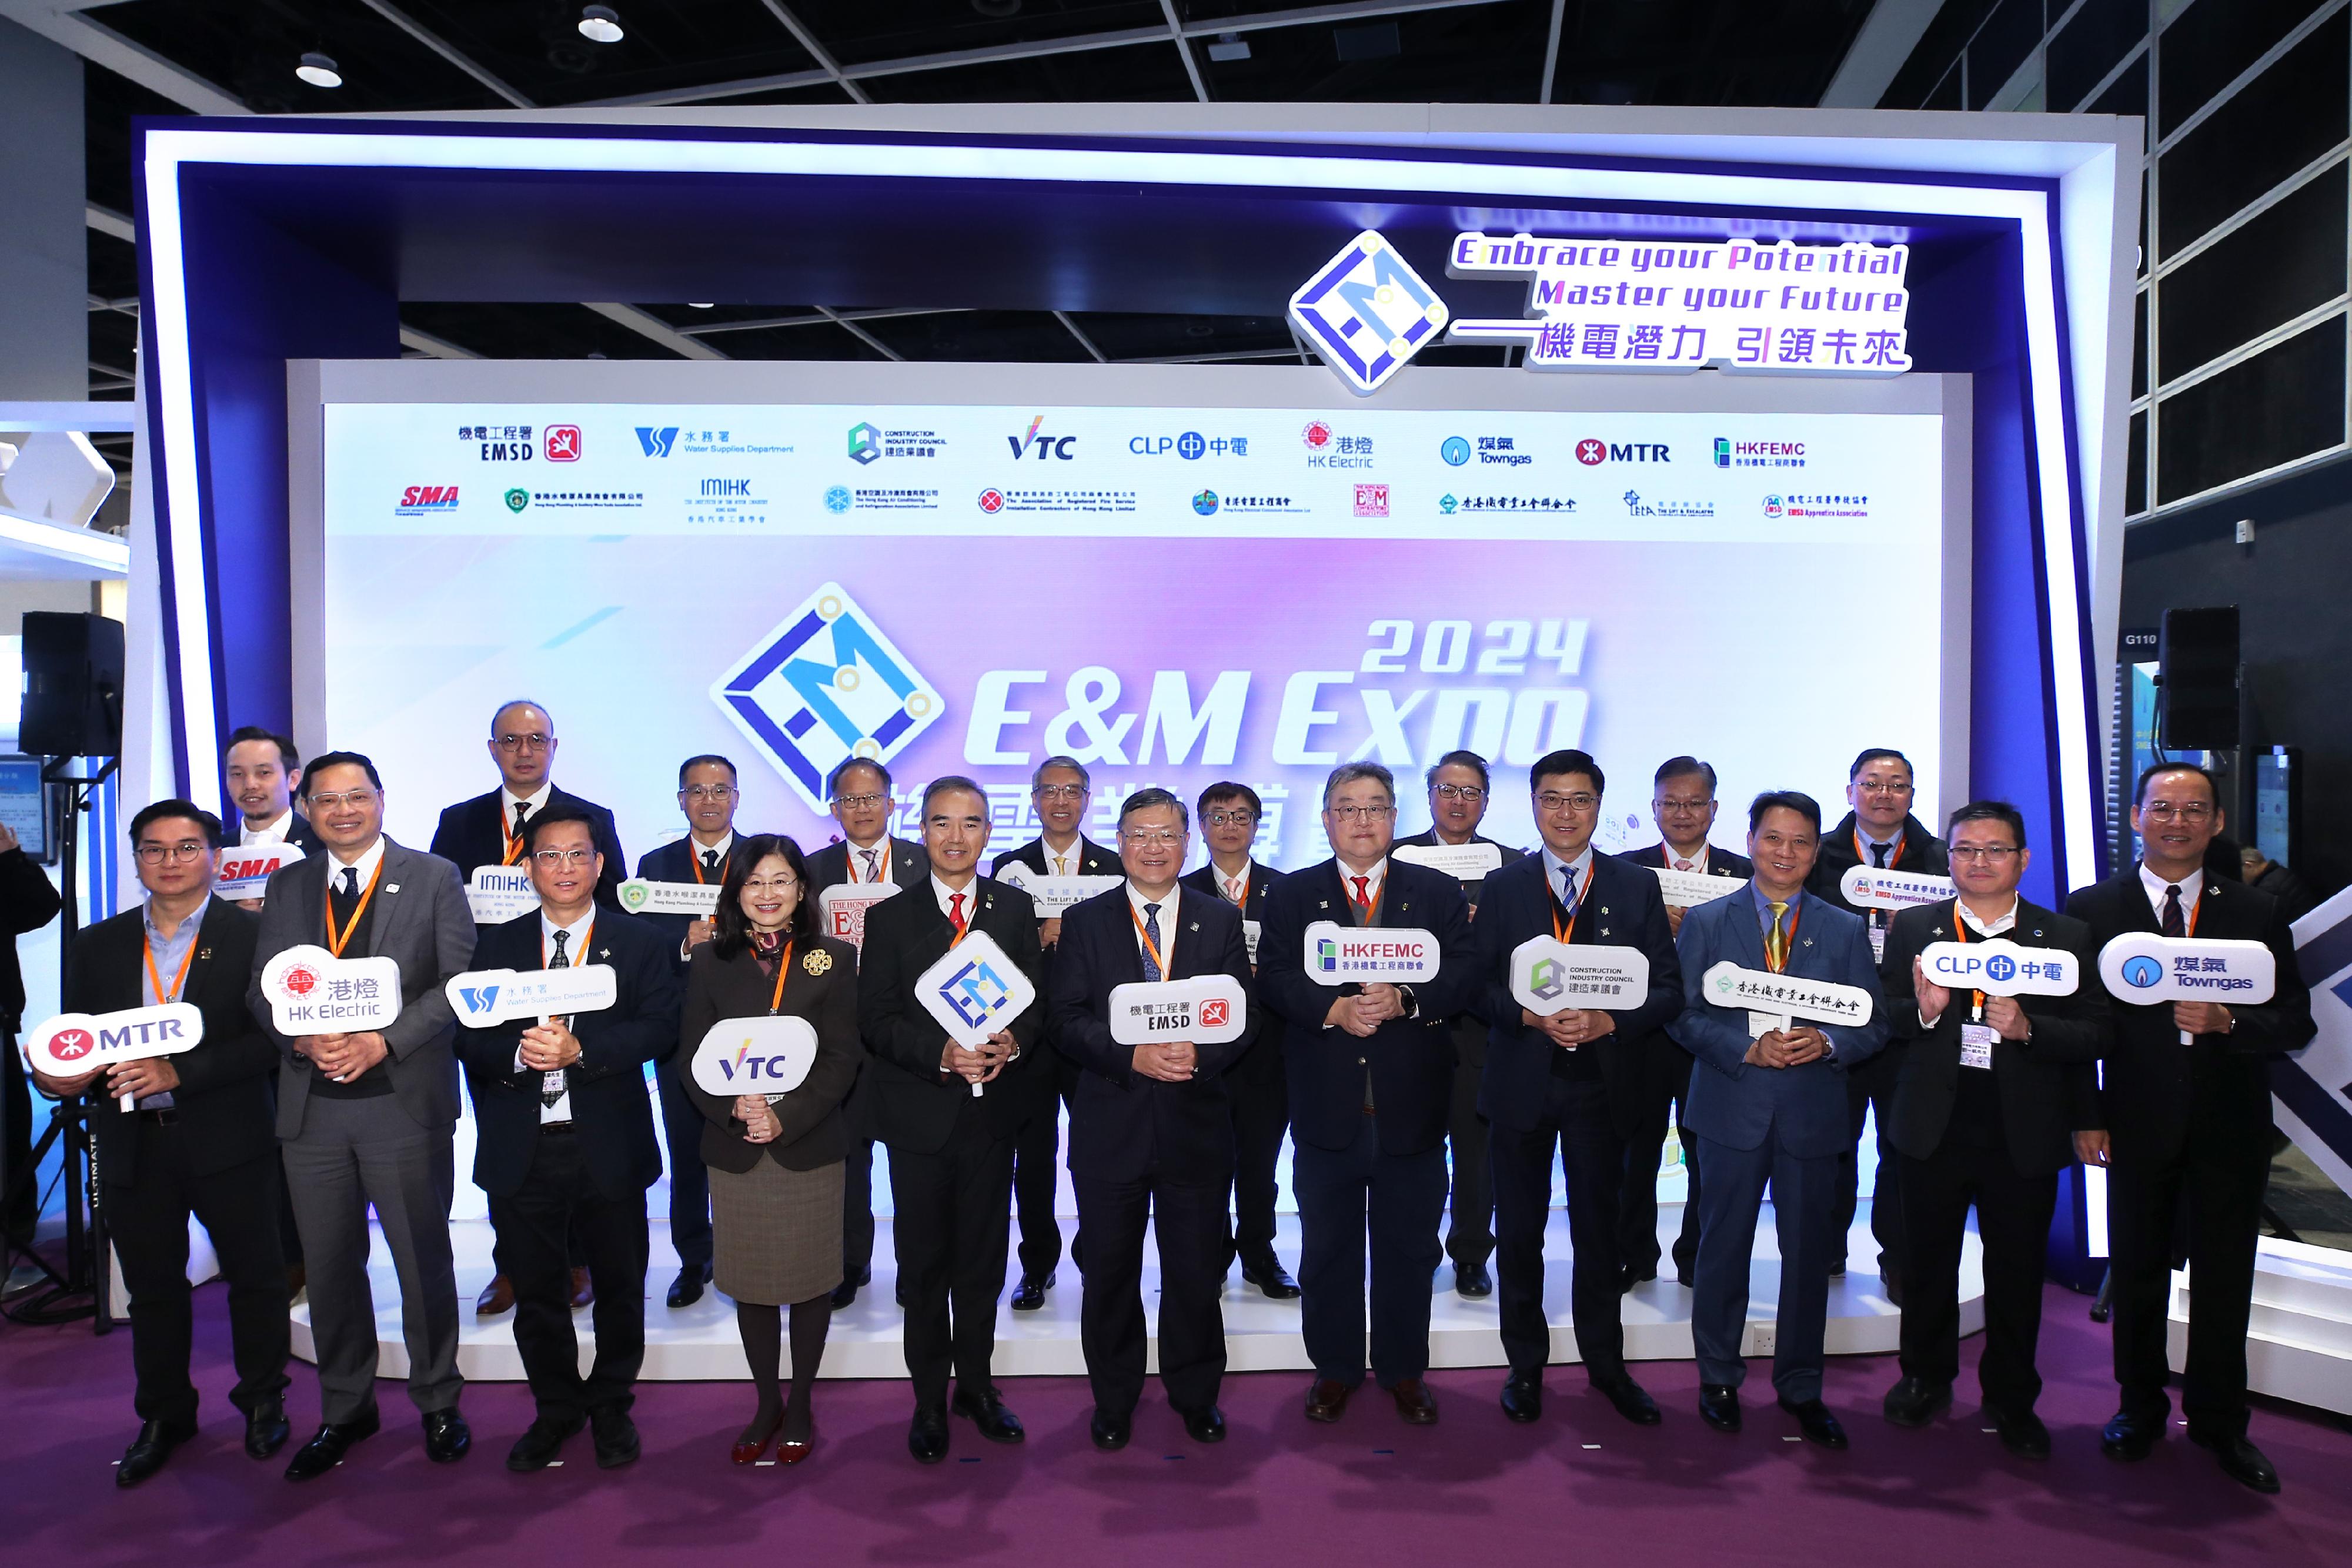 Co-organised by the Electrical and Mechanical Services Department and the Hong Kong Electrical and Mechanical Trade Promotion Working Group, the Electrical and Mechanical Expo 2024 is being held until January 28. The Director of Electrical and Mechanical Services, Mr Eric Pang (front row, centre), the Chairman of the Hong Kong Federation of Electrical and Mechanical Contractors Limited, Mr Antonio Chan (front row, fifth left), and other representatives of the Working Group officiated at the opening ceremony today (January 26).